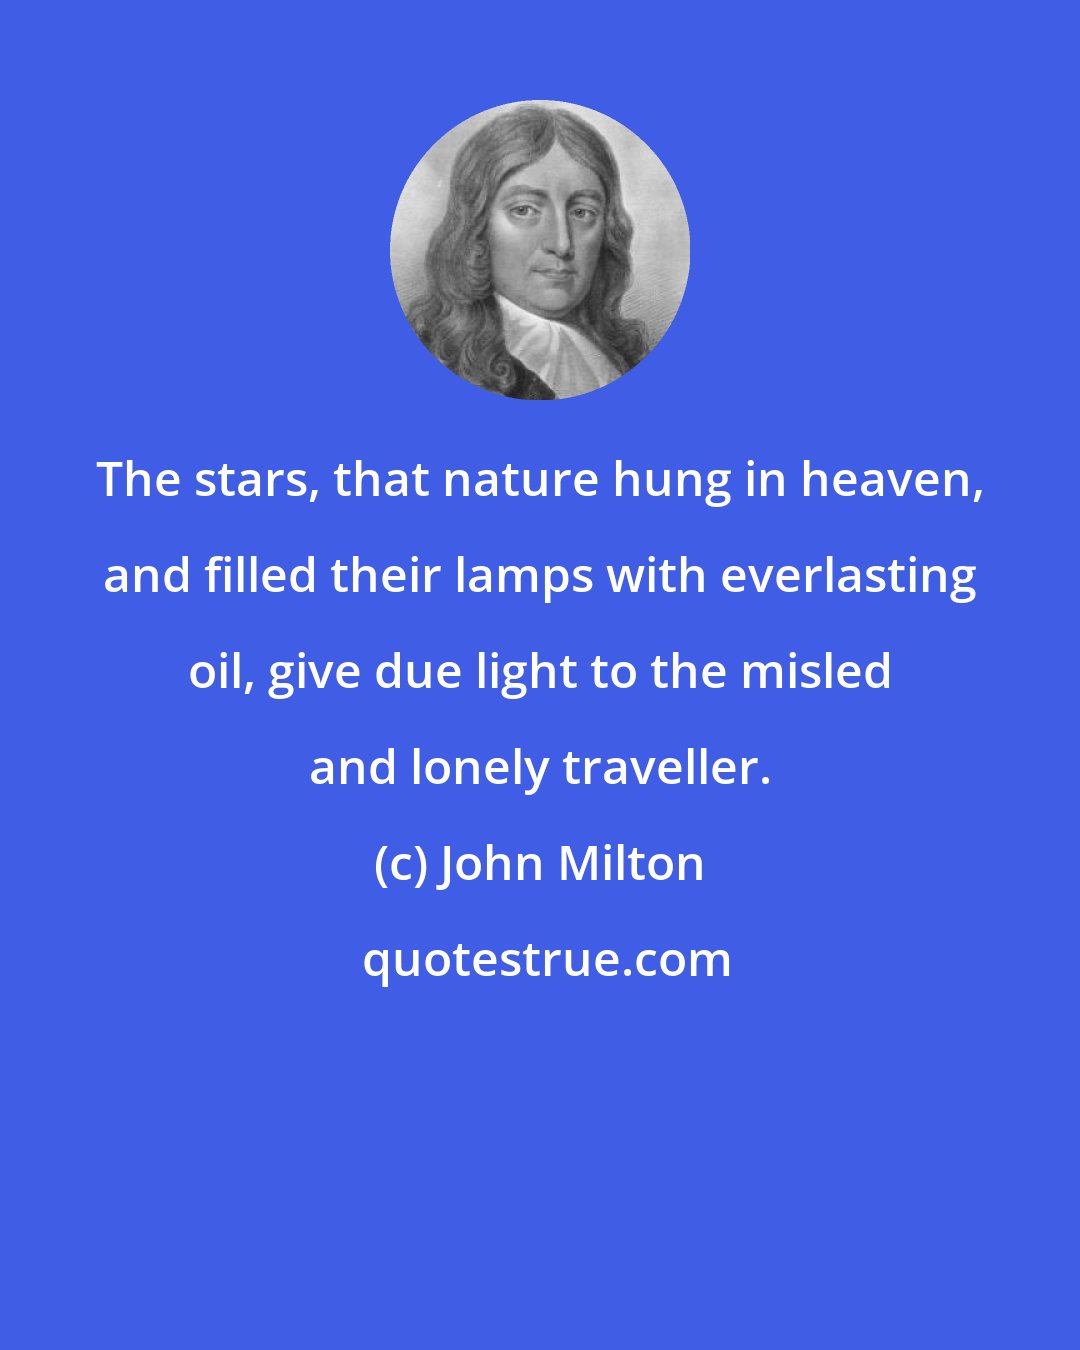 John Milton: The stars, that nature hung in heaven, and filled their lamps with everlasting oil, give due light to the misled and lonely traveller.